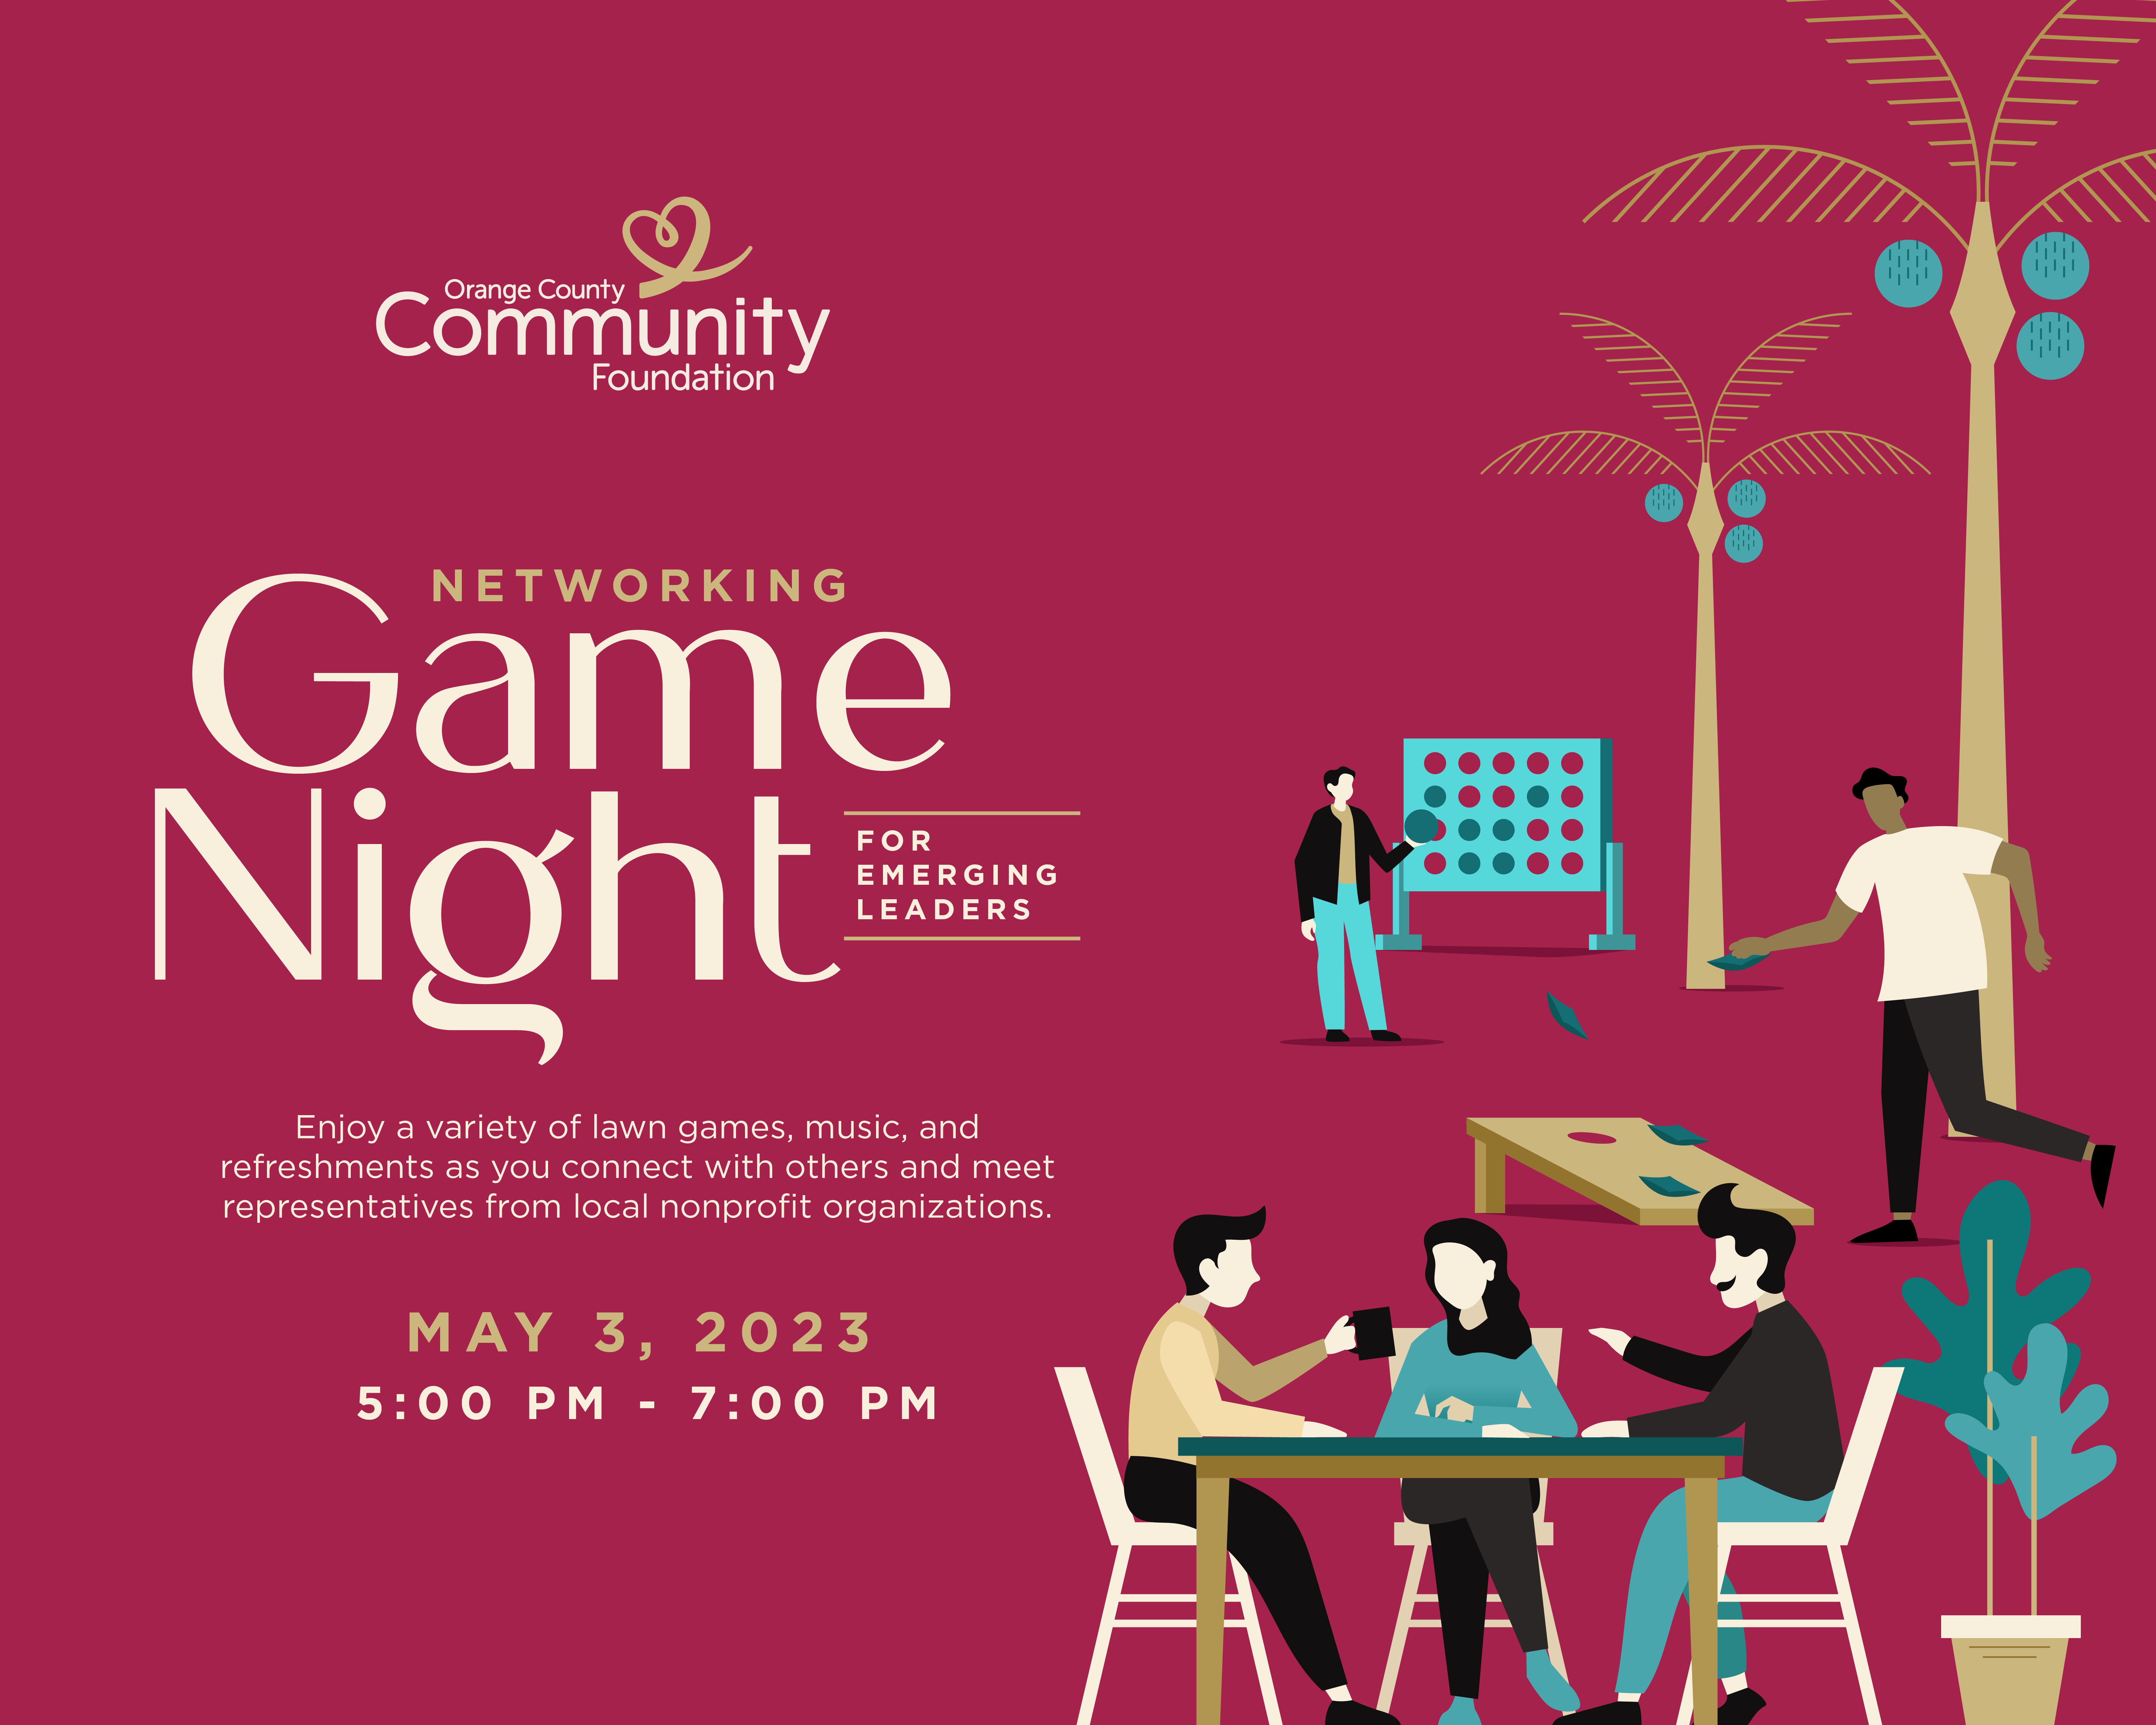 Networking Game Night for Emerging Leaders